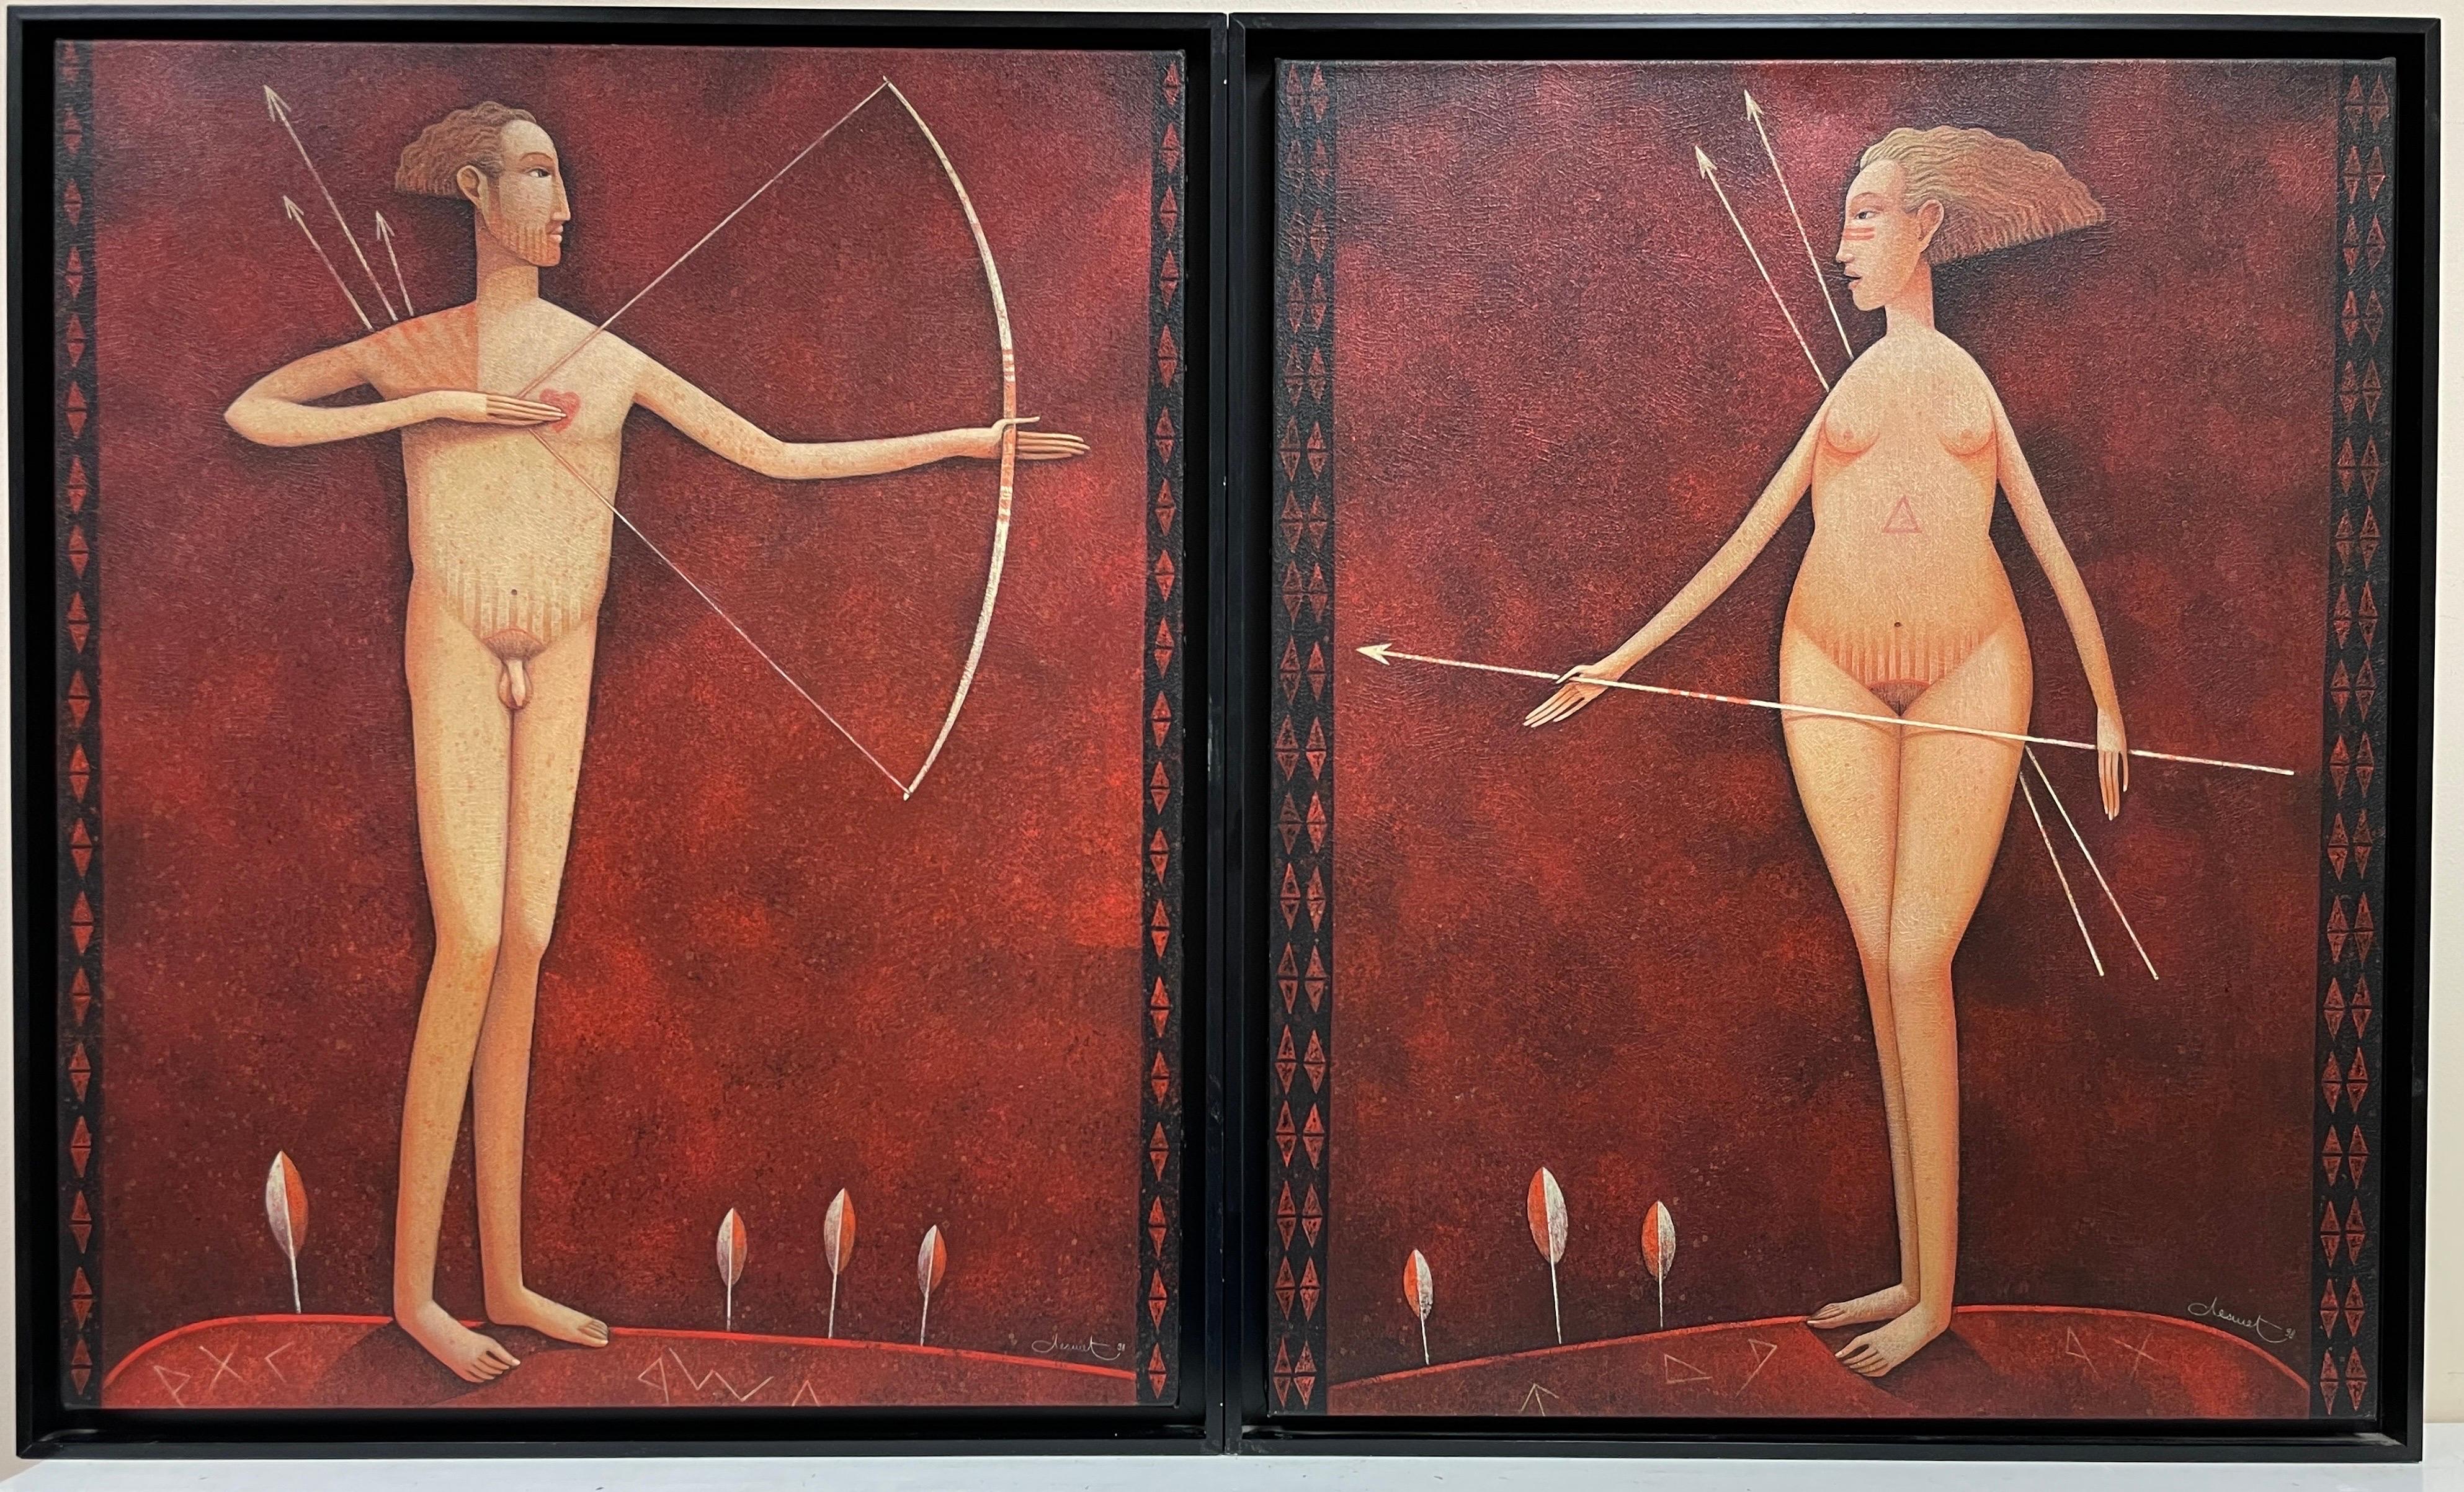 Guerriere Nude Painting - Pair French Surrealist Nude Man & Woman Portraits Archery Bow & Arrow signed